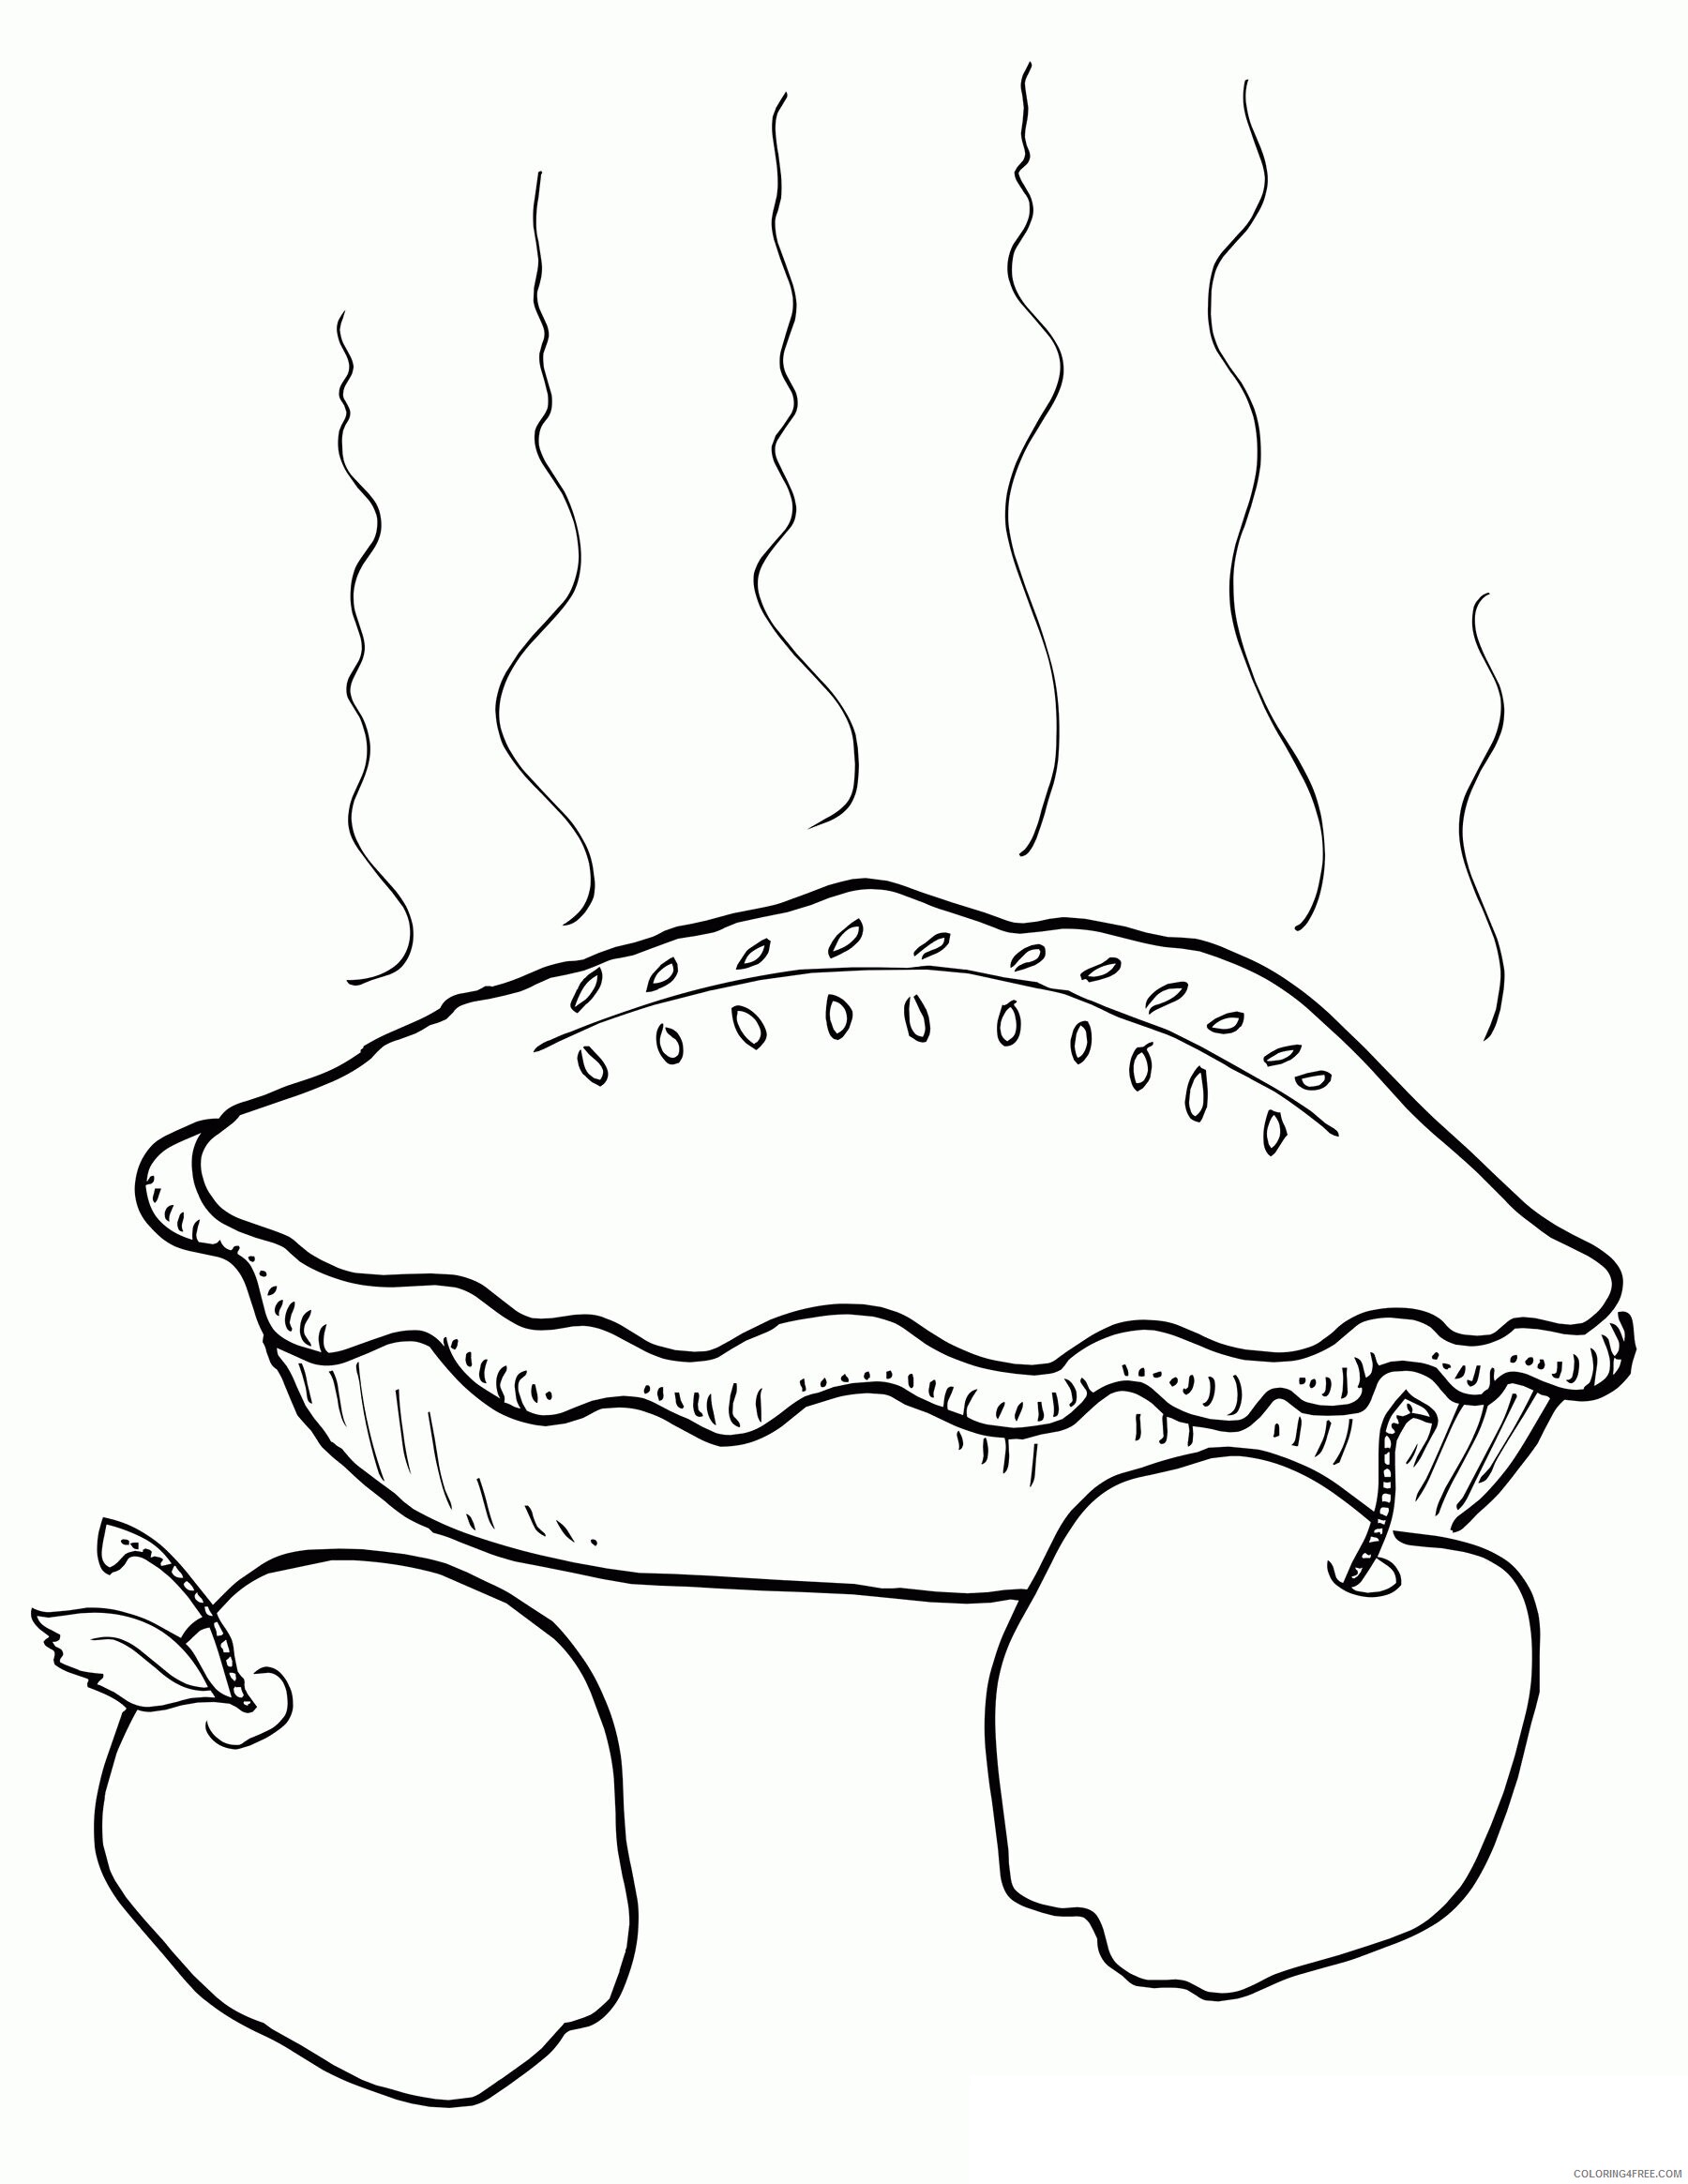 Apple Pie Coloring Page Printable Sheets Hot Apple Pie Create 2021 a 2014 Coloring4free